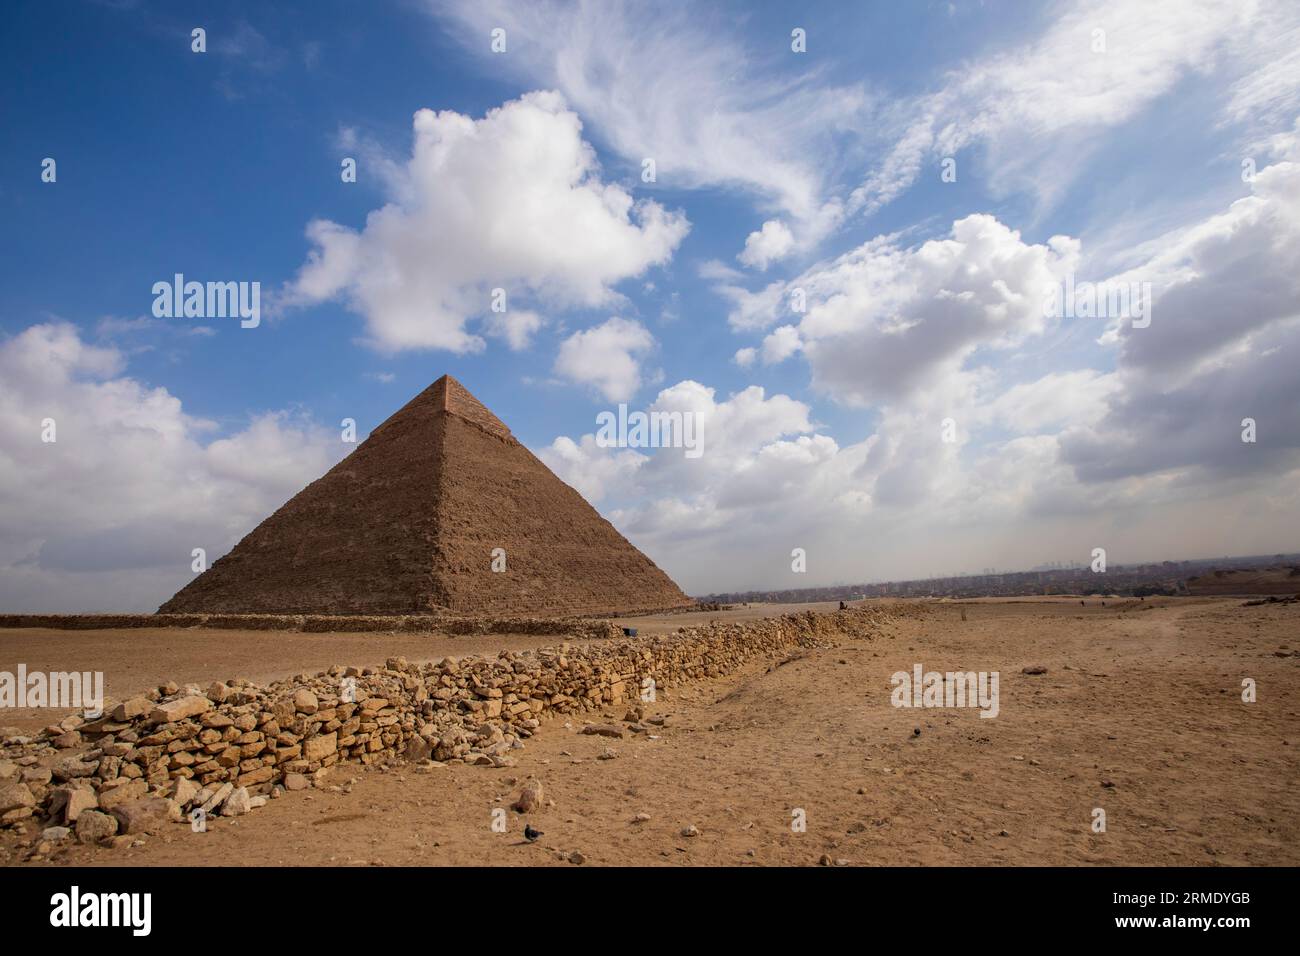 The Pyramid of Khafre, the second largest of the Pyramids of Giza Stock Photo